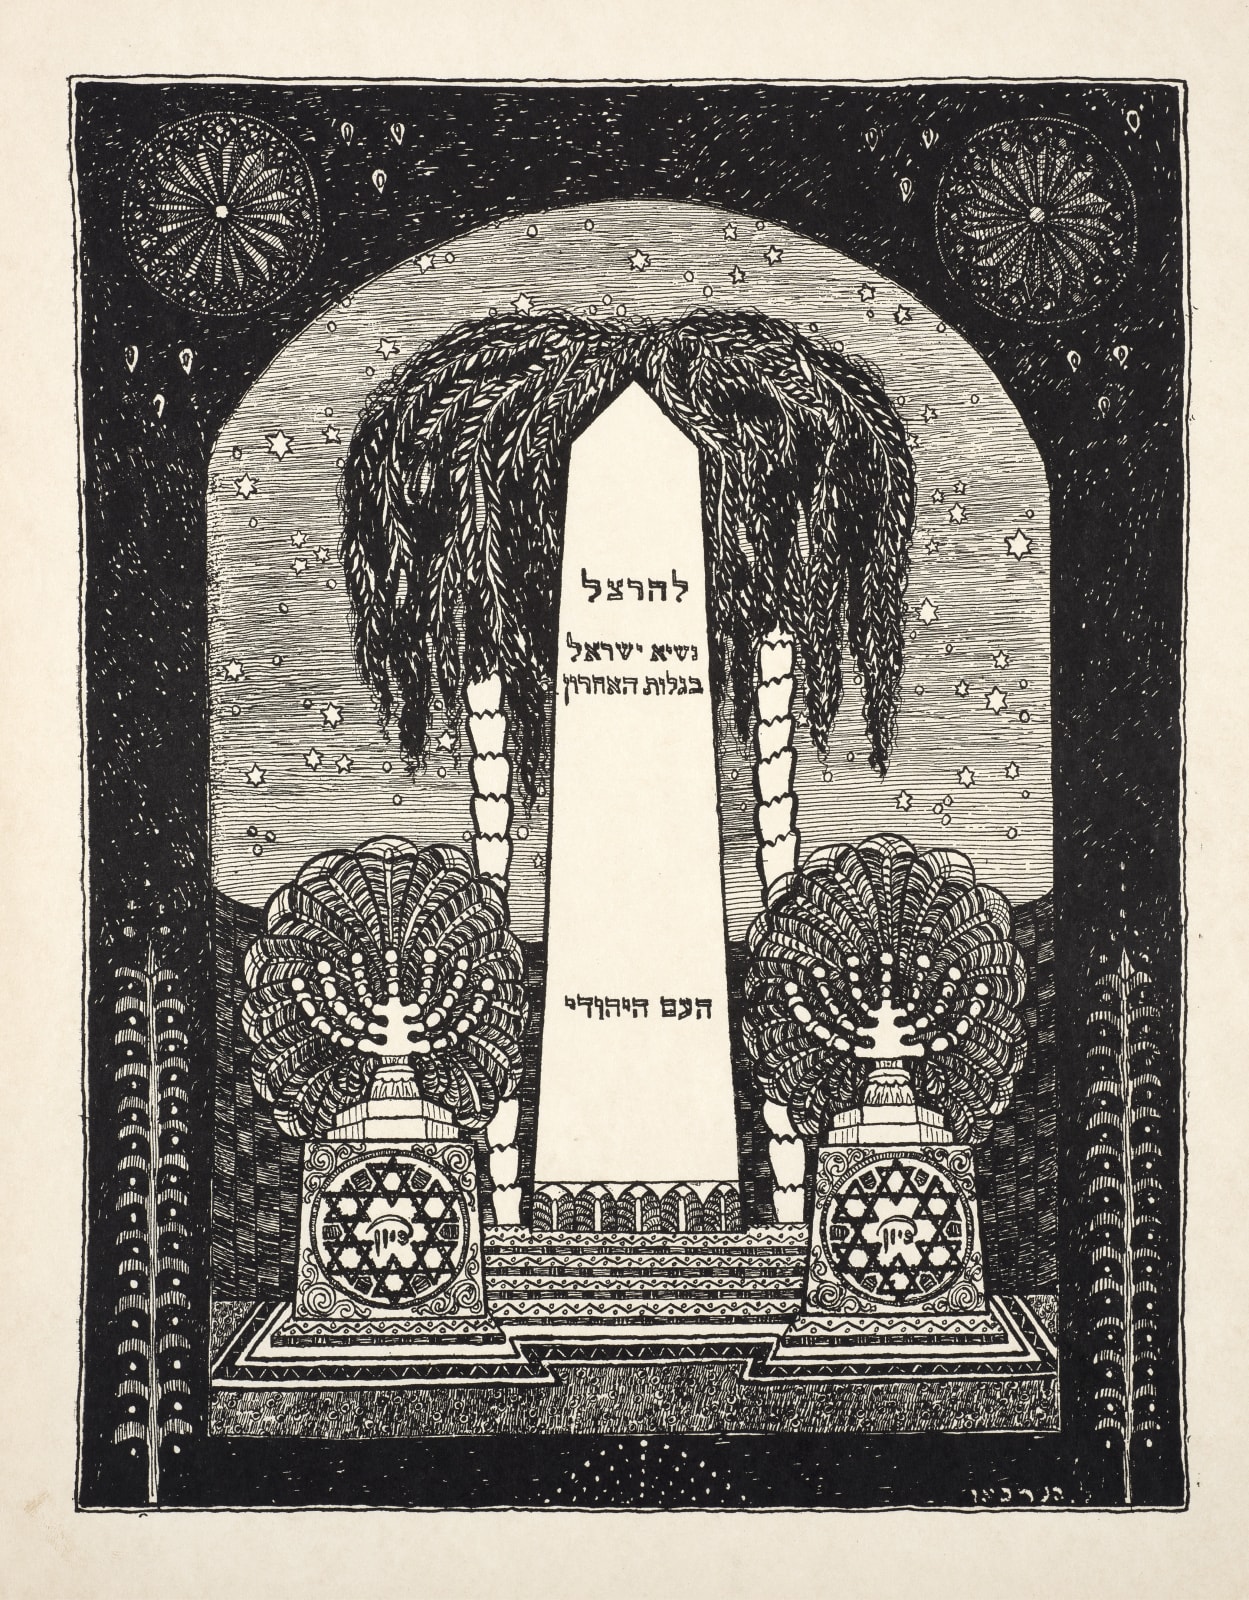 Lazar Berson (1882-1954) Ben Uri Album: natsional yidish dekorativer kunst-ferayin, noch yidishe motivn fun fargangene tsaytn (Monument to Theodor Herzl) 1916 Pen and ink on paper 32 x 26 cm Ben Uri Collection © Lazar Berson estate To see and discover more about this artist click here